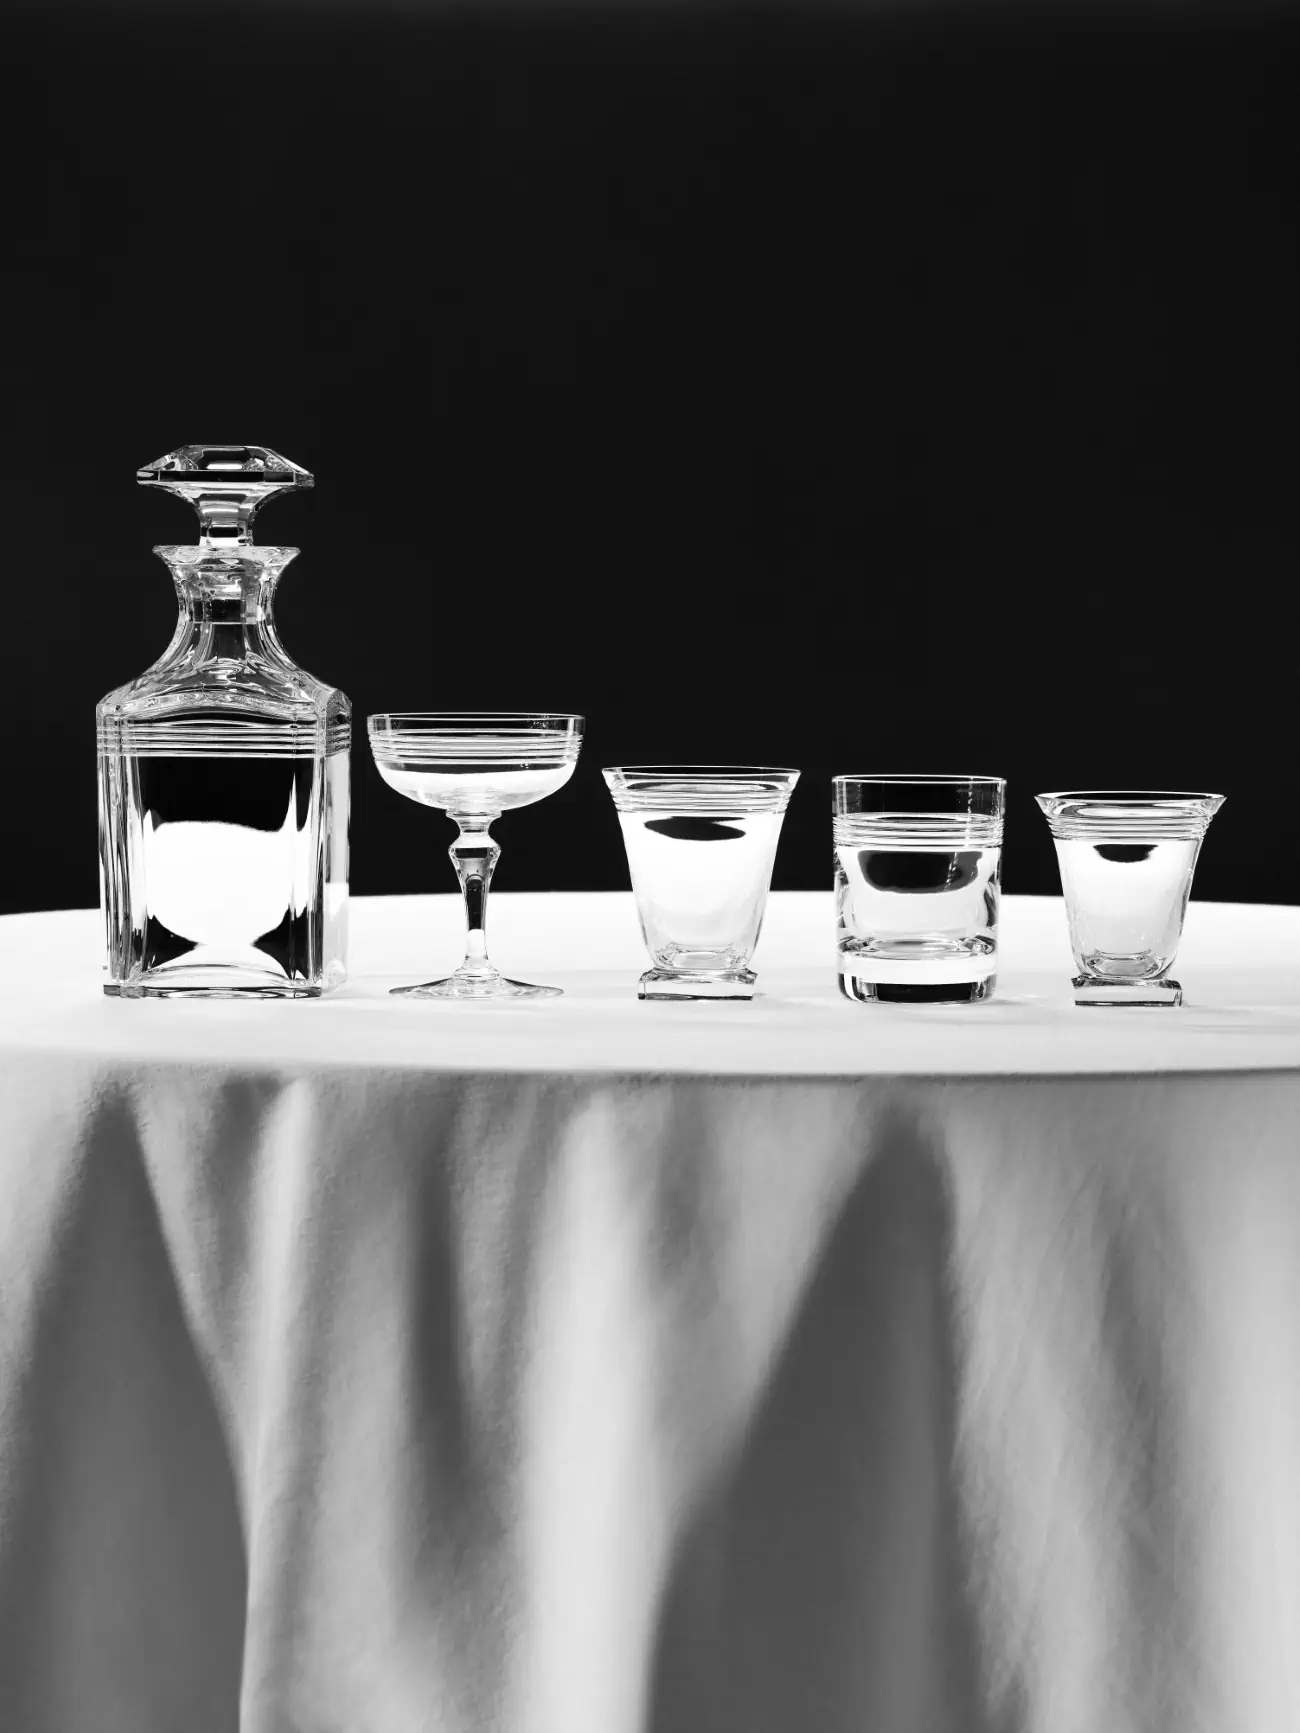 Thom Browne and Baccarat debut exclusive glassware collection